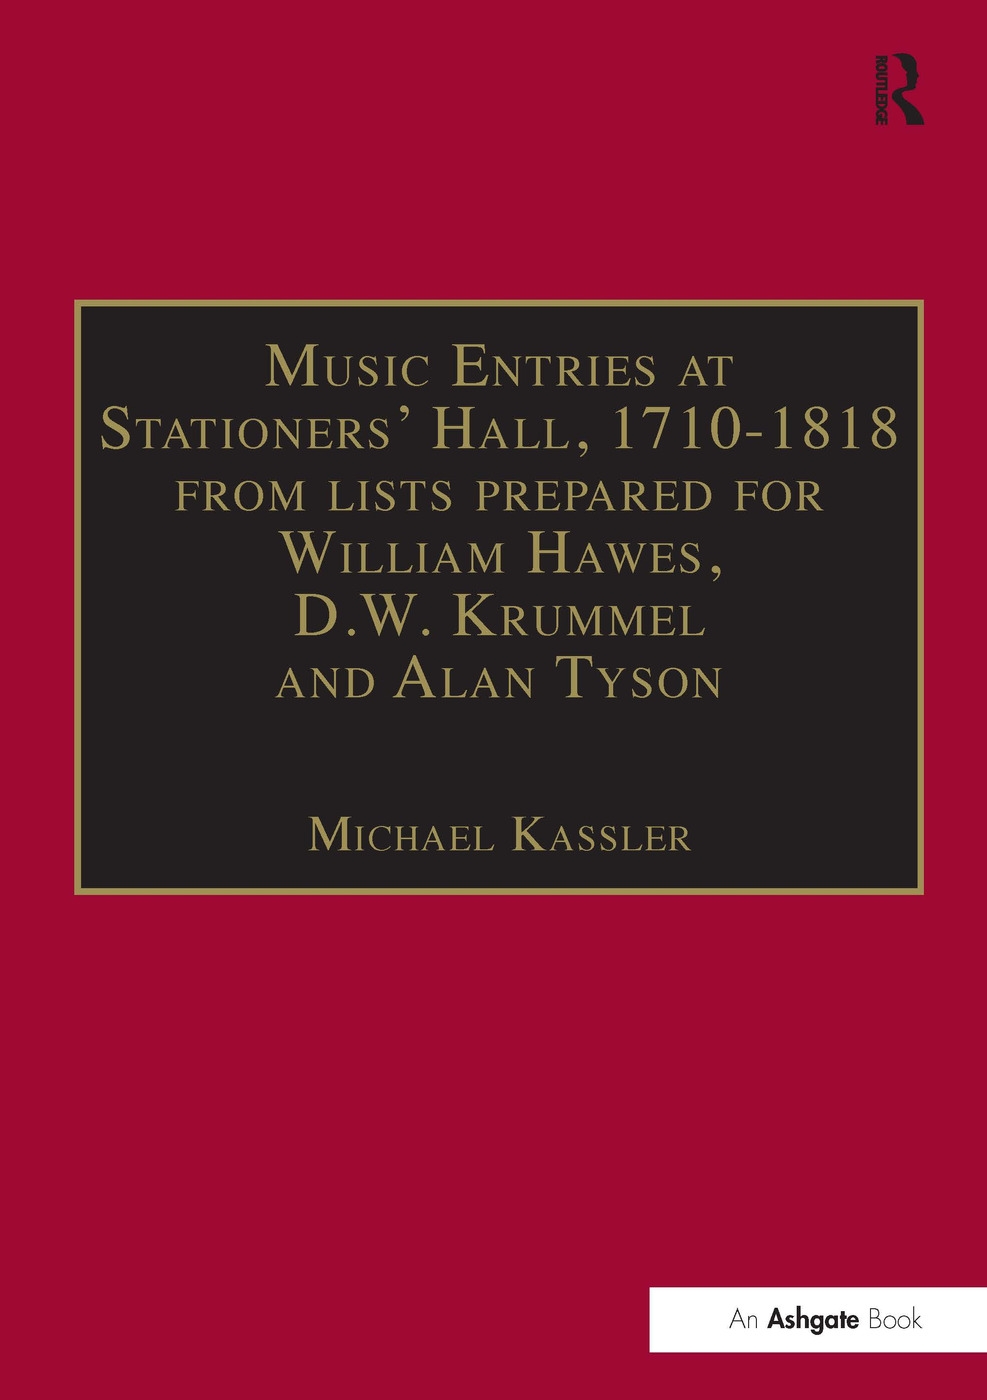 Music Entries at Stationers’ Hall, 1710-1818: From Lists Prepared for William Hawes, D.W. Krummel, and Alan Tyson and from Othe